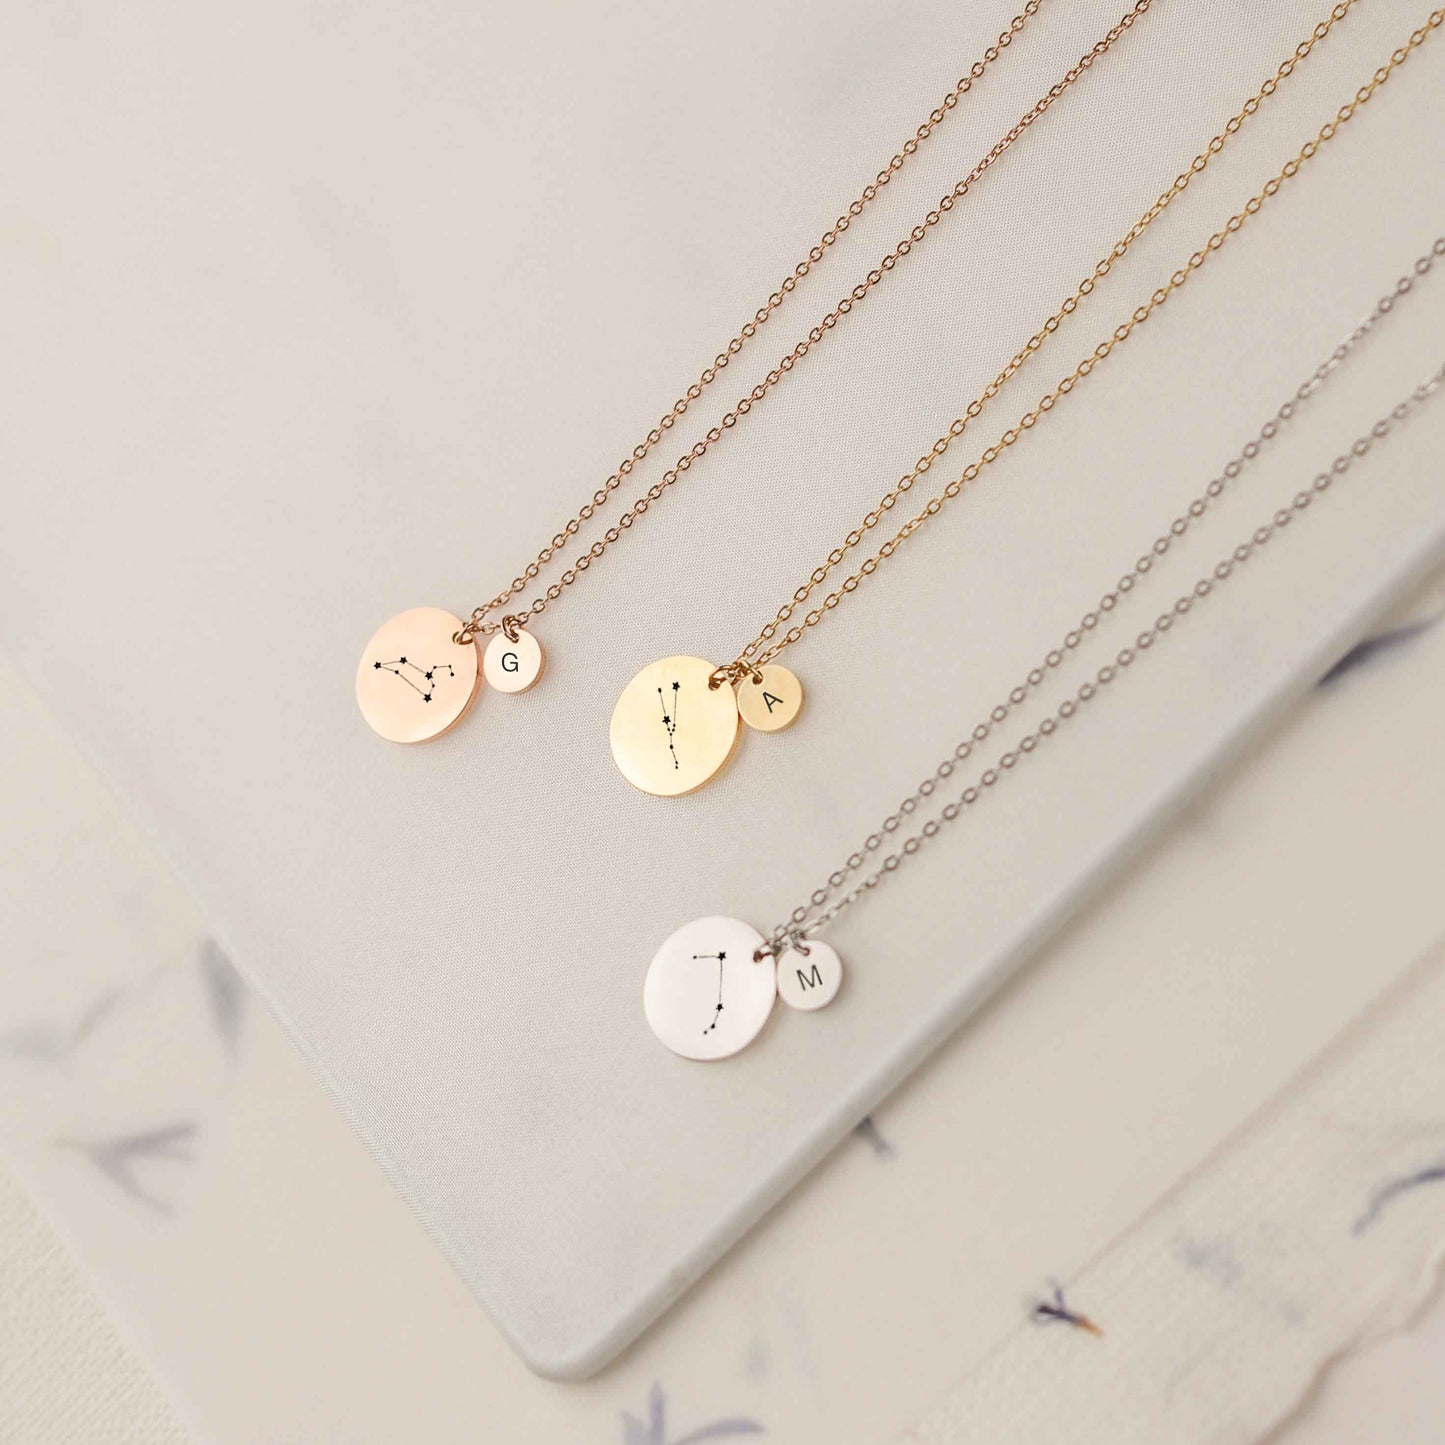 UNIQUE TWO COINS PERSONALIZED SIGN NECKLACE